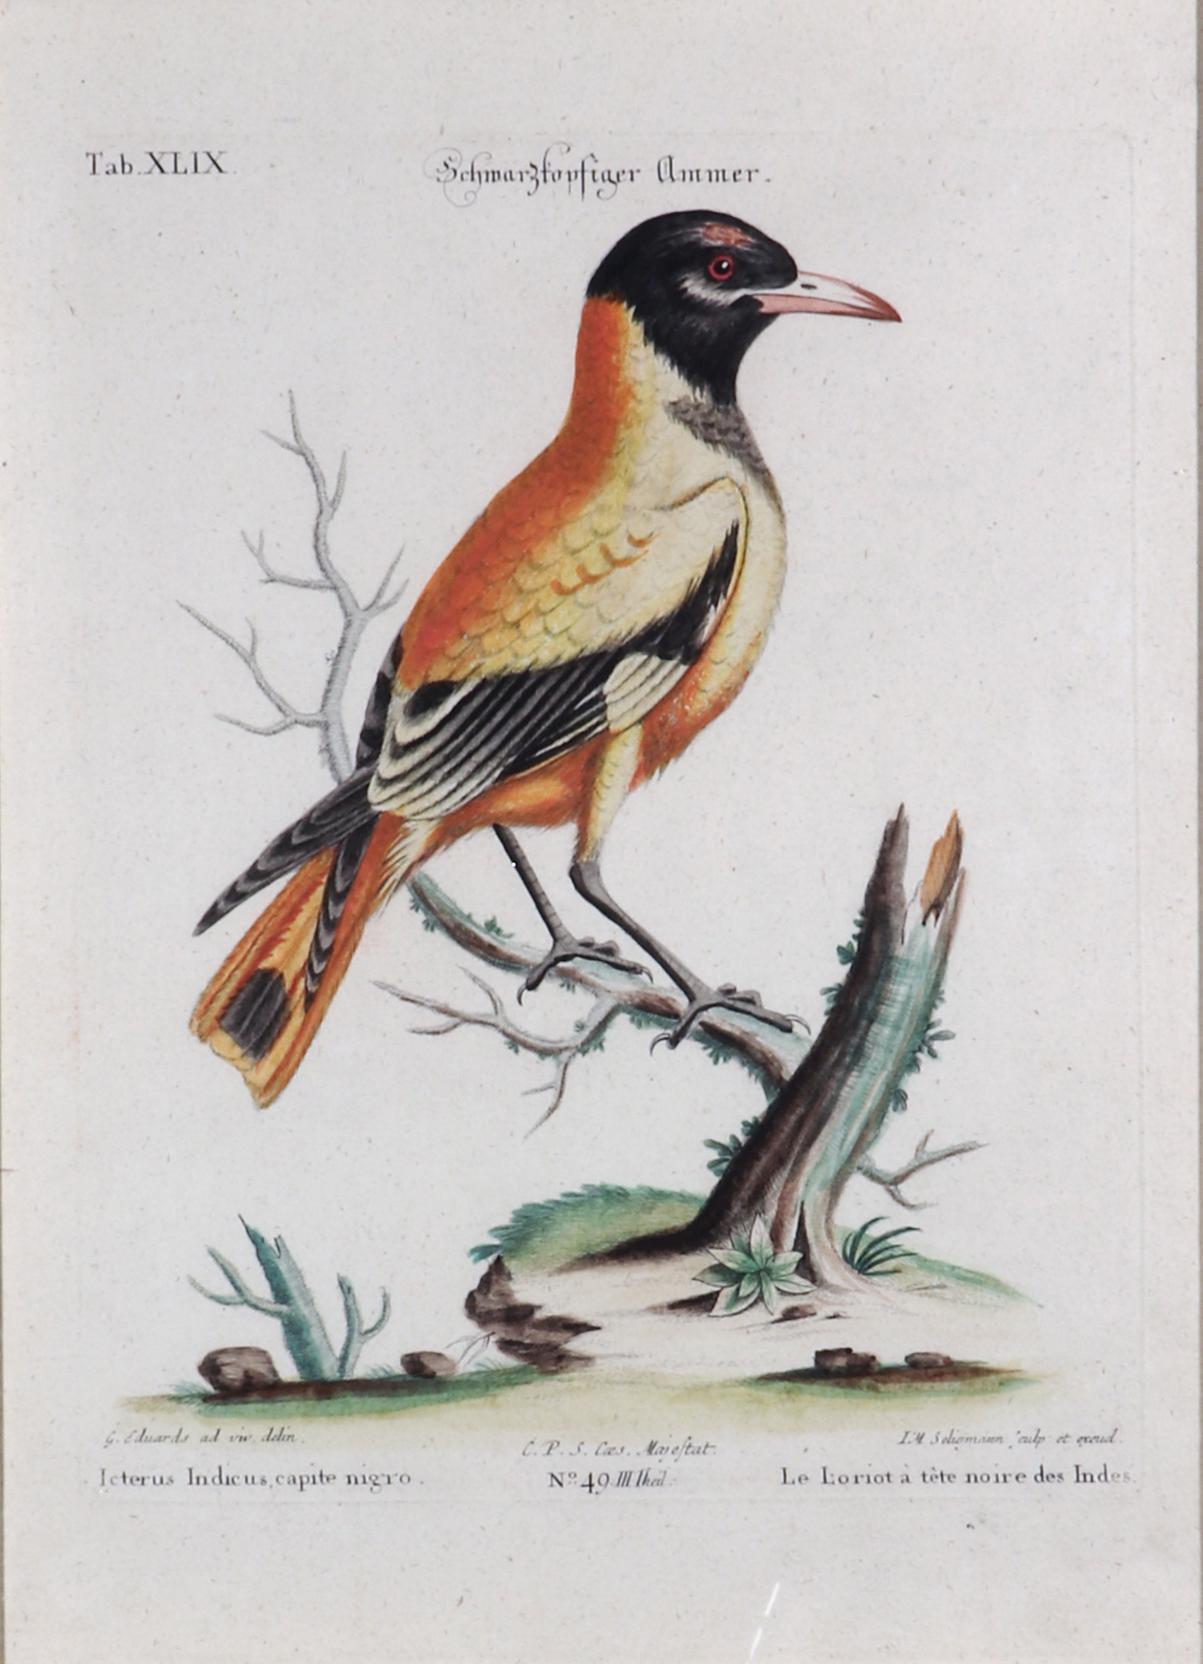 Johann Seligmann Bird Engraving, 
Tab XLIX, 
Le Loriot a tete noires Indes,
1770s

The Johann Seligmann engraving from the French Edition was hand-colored at publication and is now mounted in a decoupage frame.

The engravings with German, Latin &